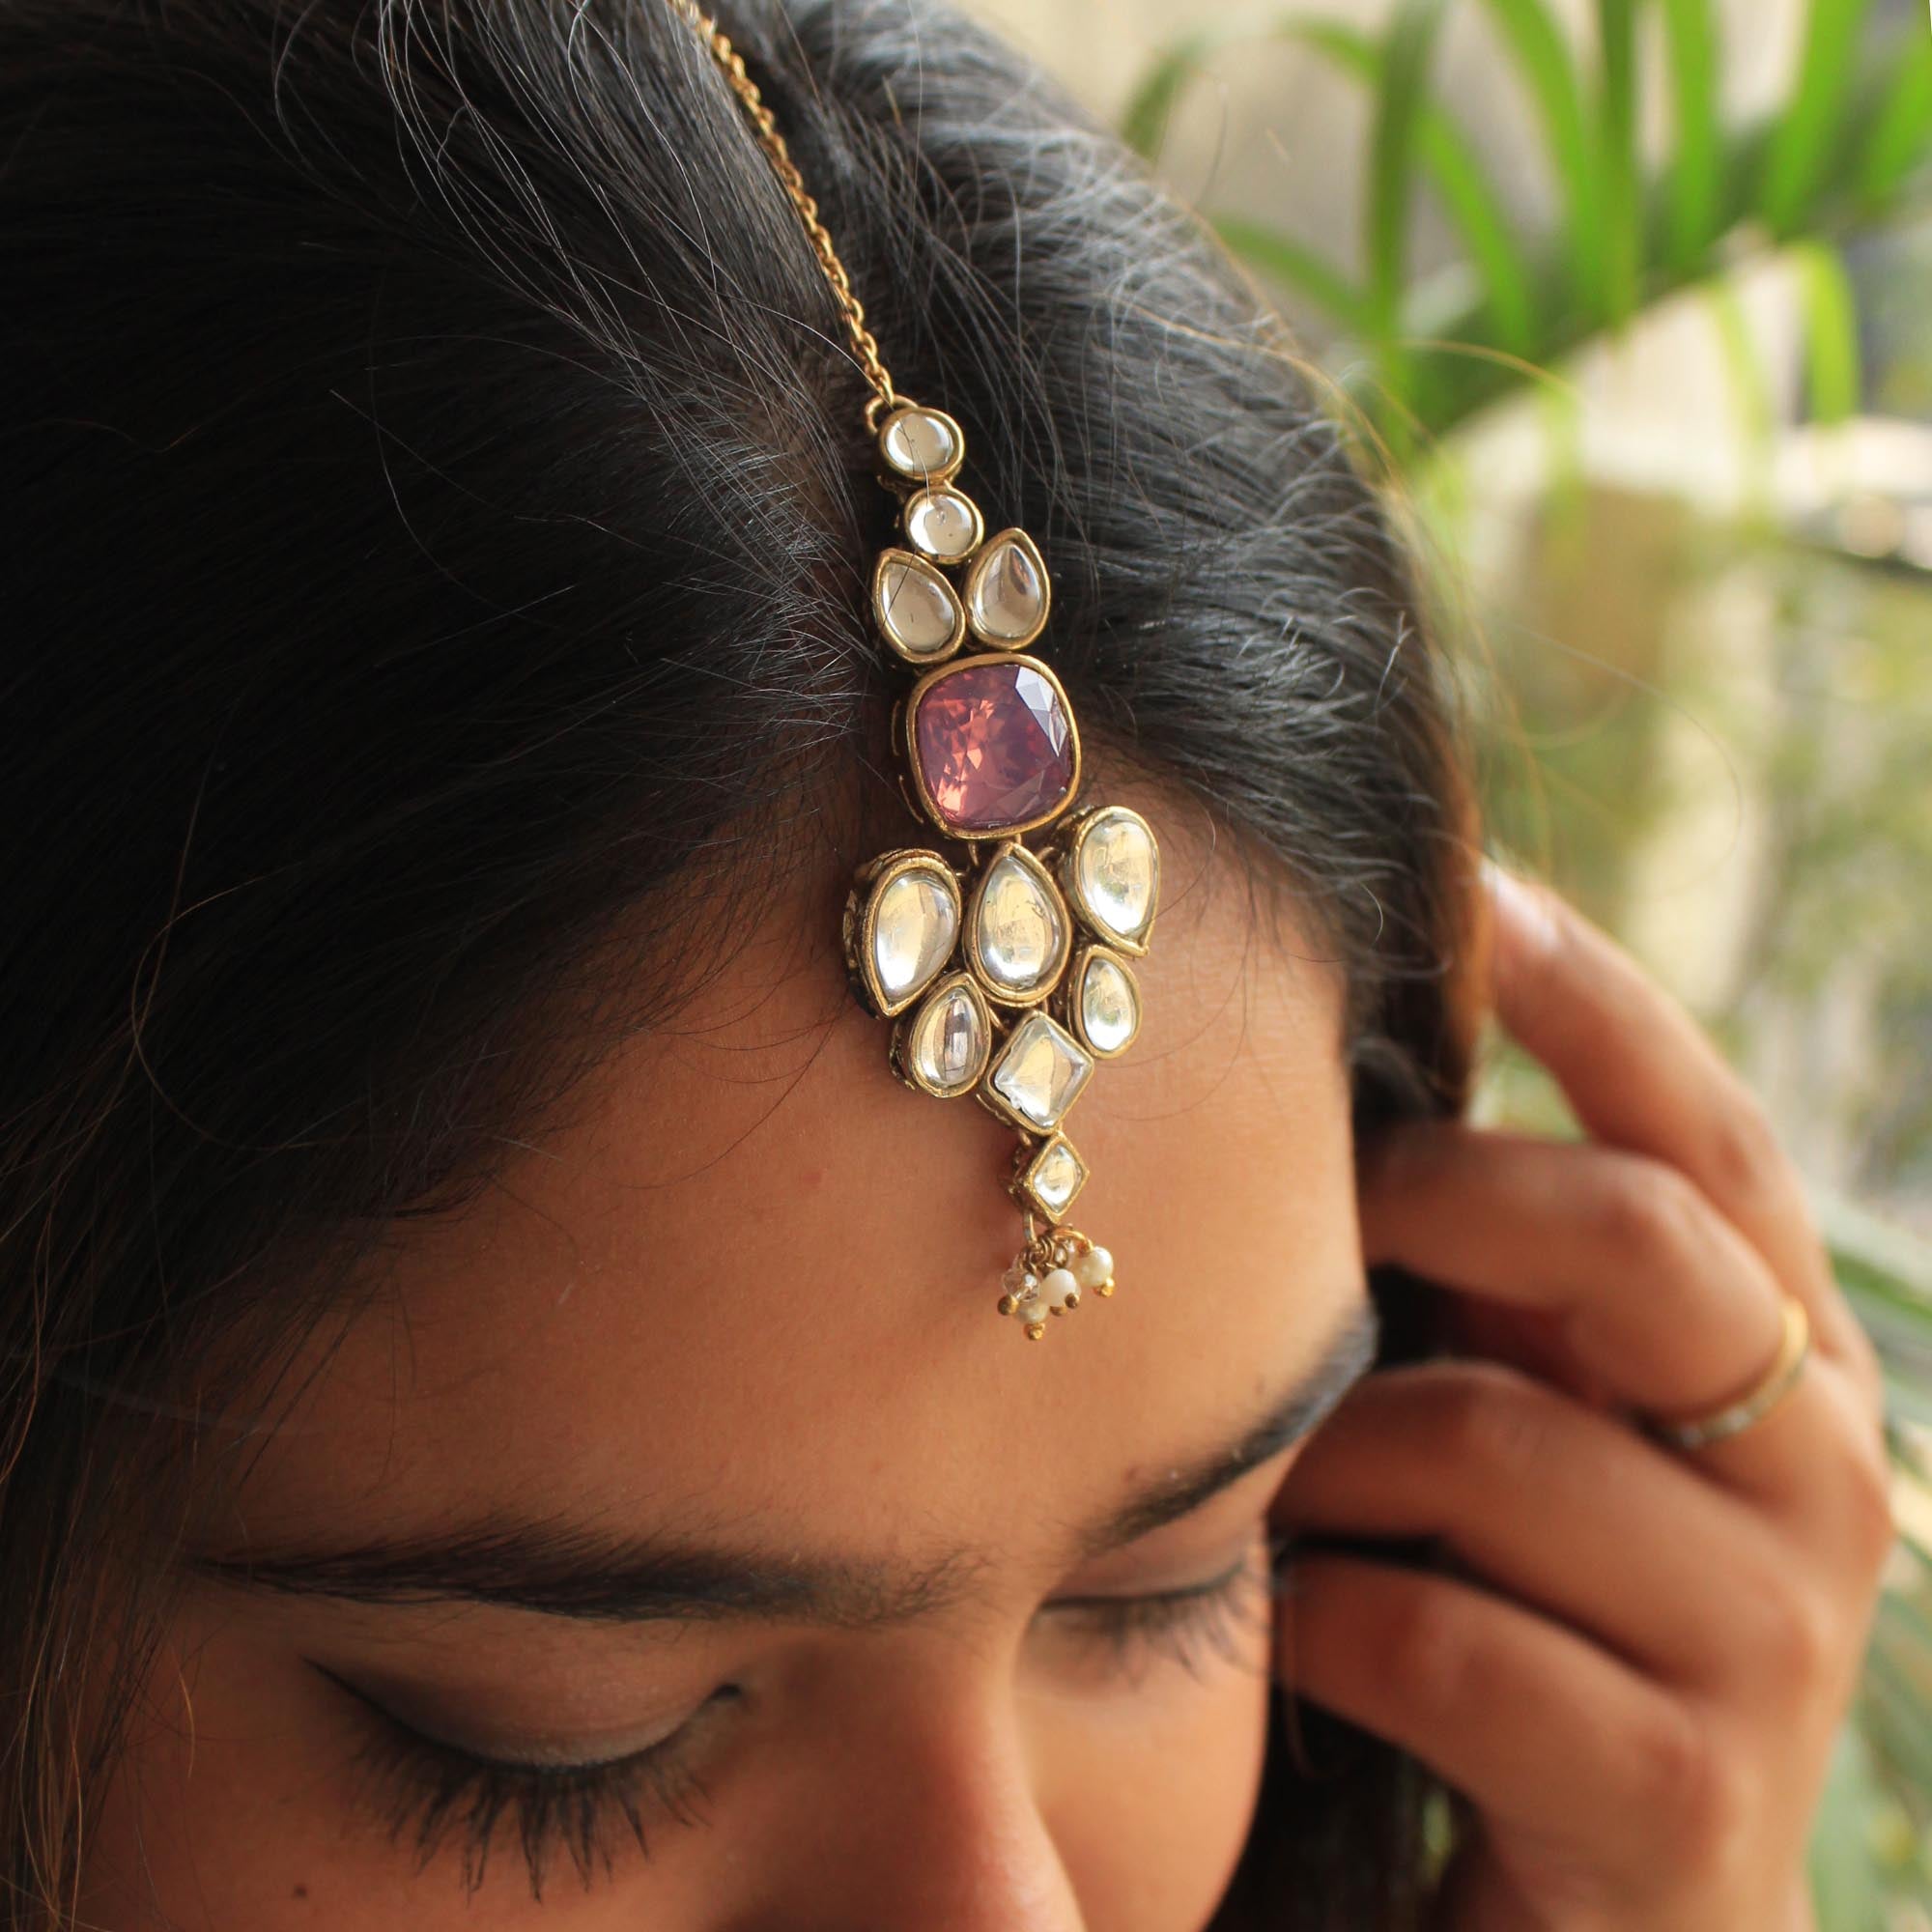 BeAbhika Handmade Artificial Jewelry Purple Color Kundan Necklace Set With Matching Earrings And Maang Tikka Head Jewelry Hair Jewelry Combo Mathapati Set White Color Pearls Kundan Chocker Necklace Set Traditional Kundan Necklace With Matching Mathapatti And Earrings Available On COD In India Heeramandi Style Jewelry Matching Ethnic Dress Turn on